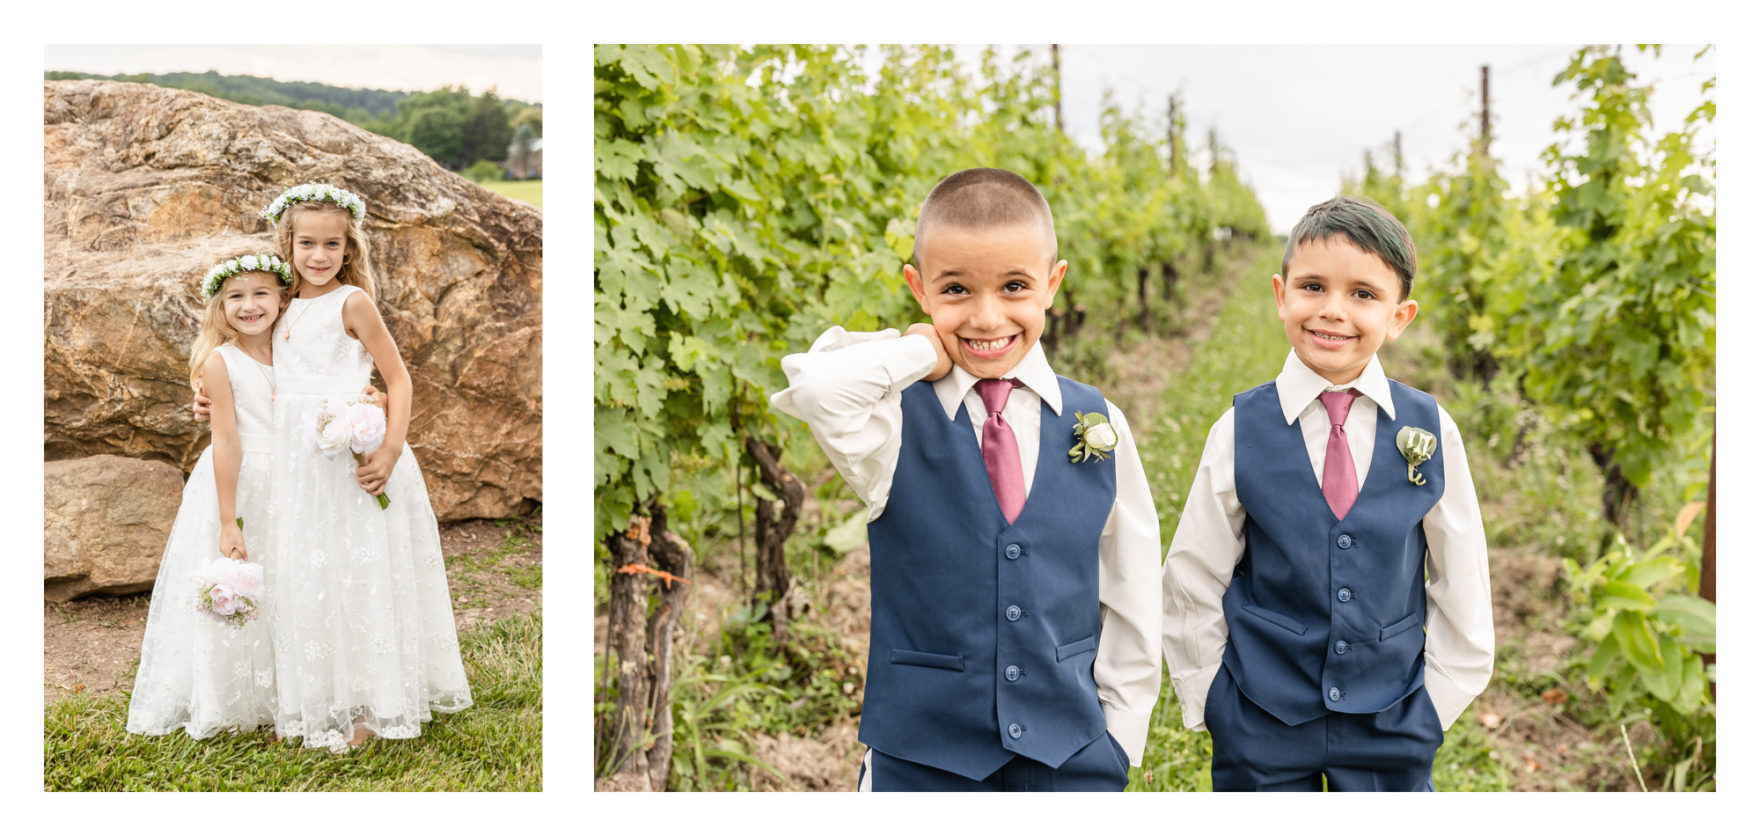 Summer wedding at Black Ankle Winery. Junior best men, gymnast dancing, mauve and navy wedding colors, double rainbow at wedding, sparkler send off